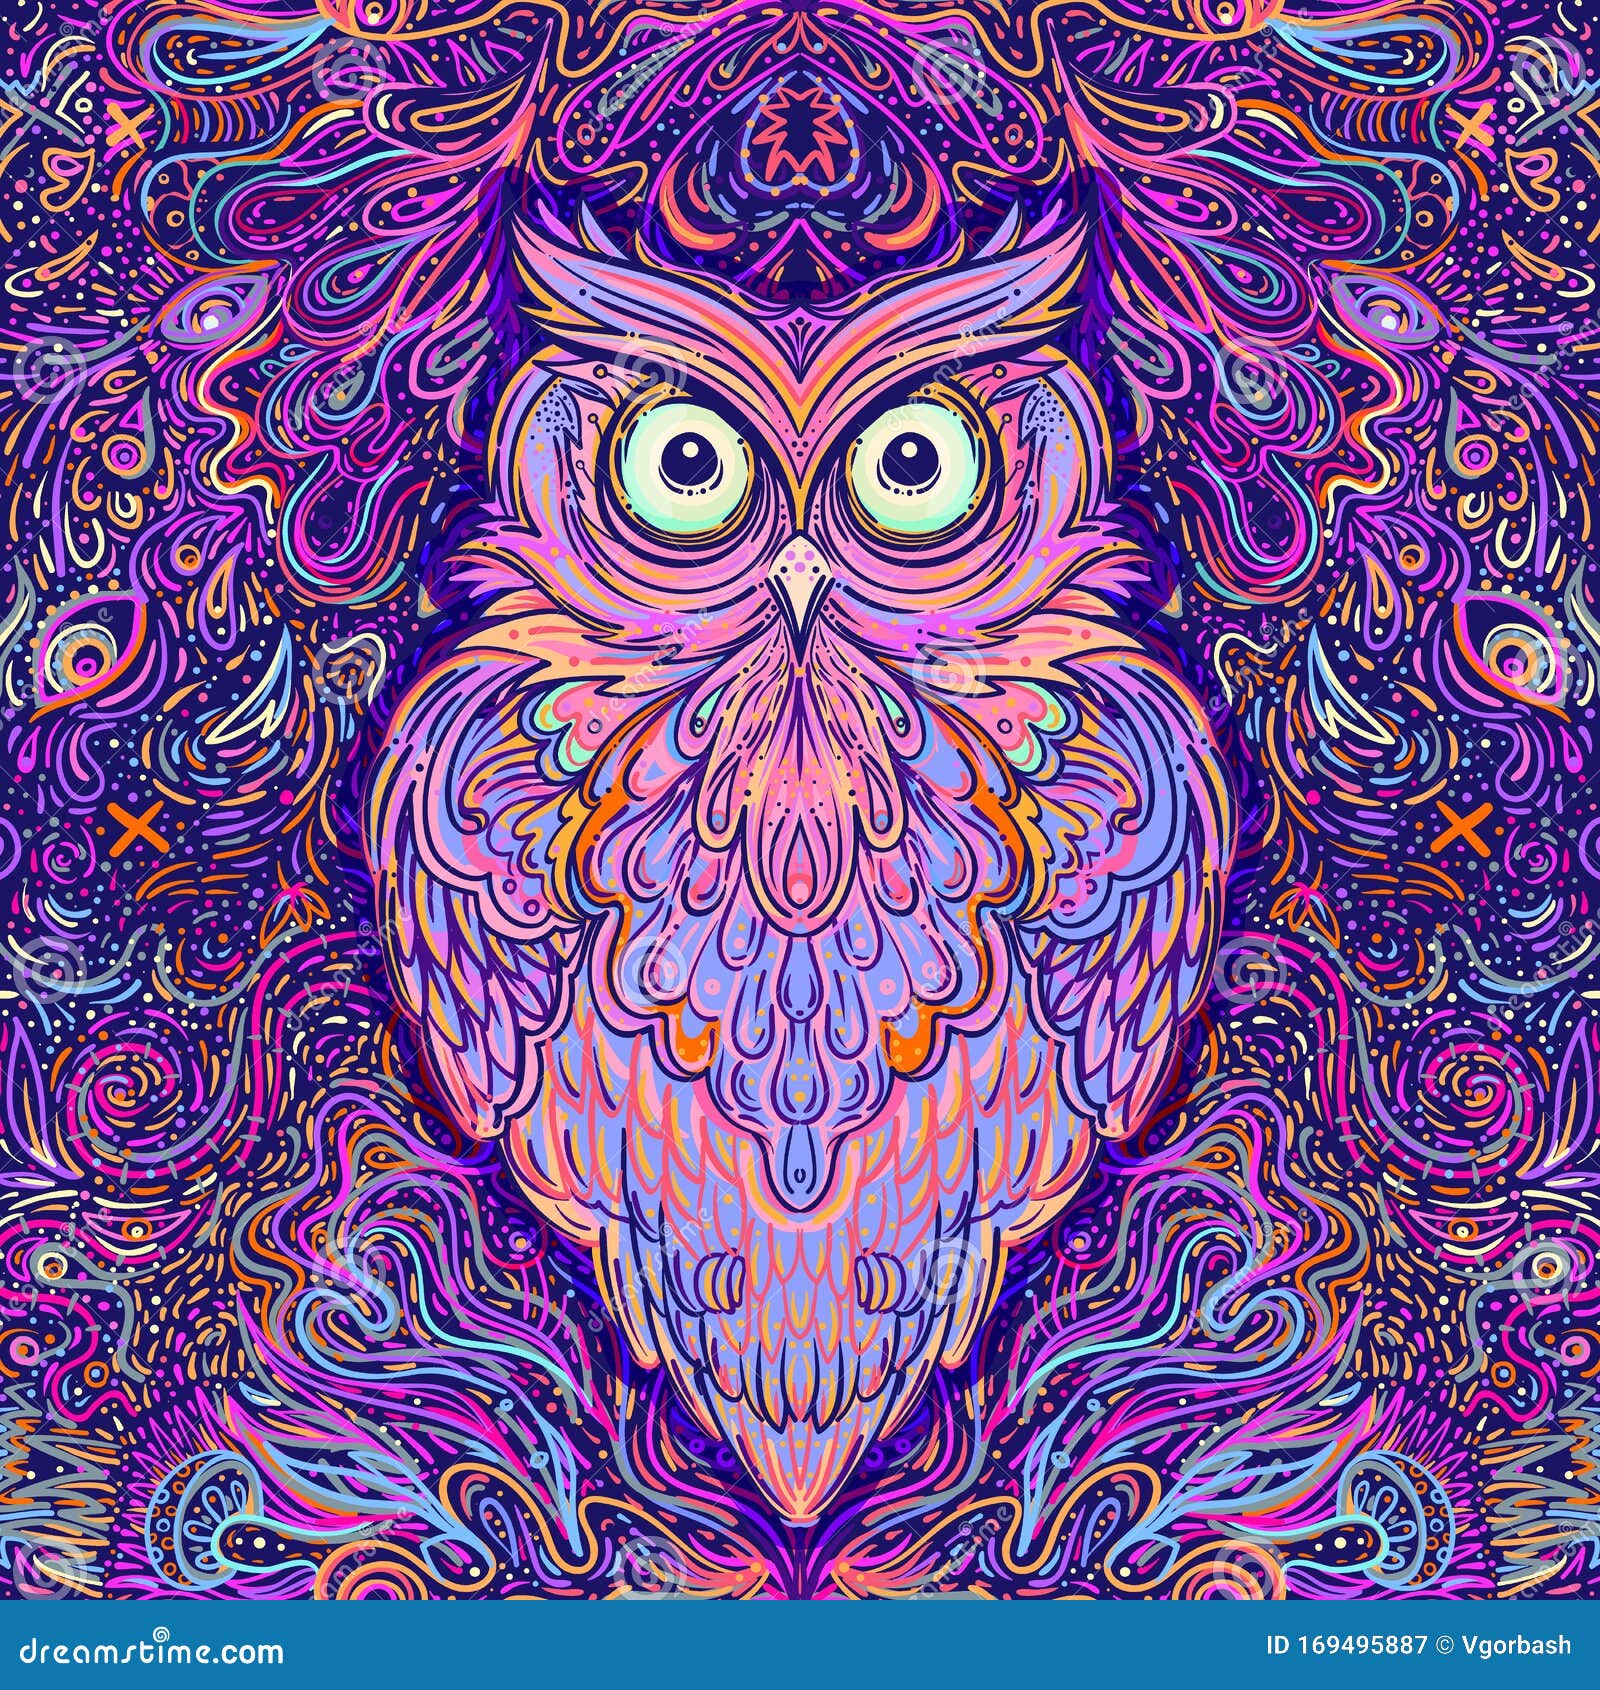 Cute Abstract Owl and Psychedelic Ornate Pattern Character Tattoo Design  for Pet Lovers Artwork for Print Textiles Stock Vector  Illustration of  hypnotic ornate 169495887